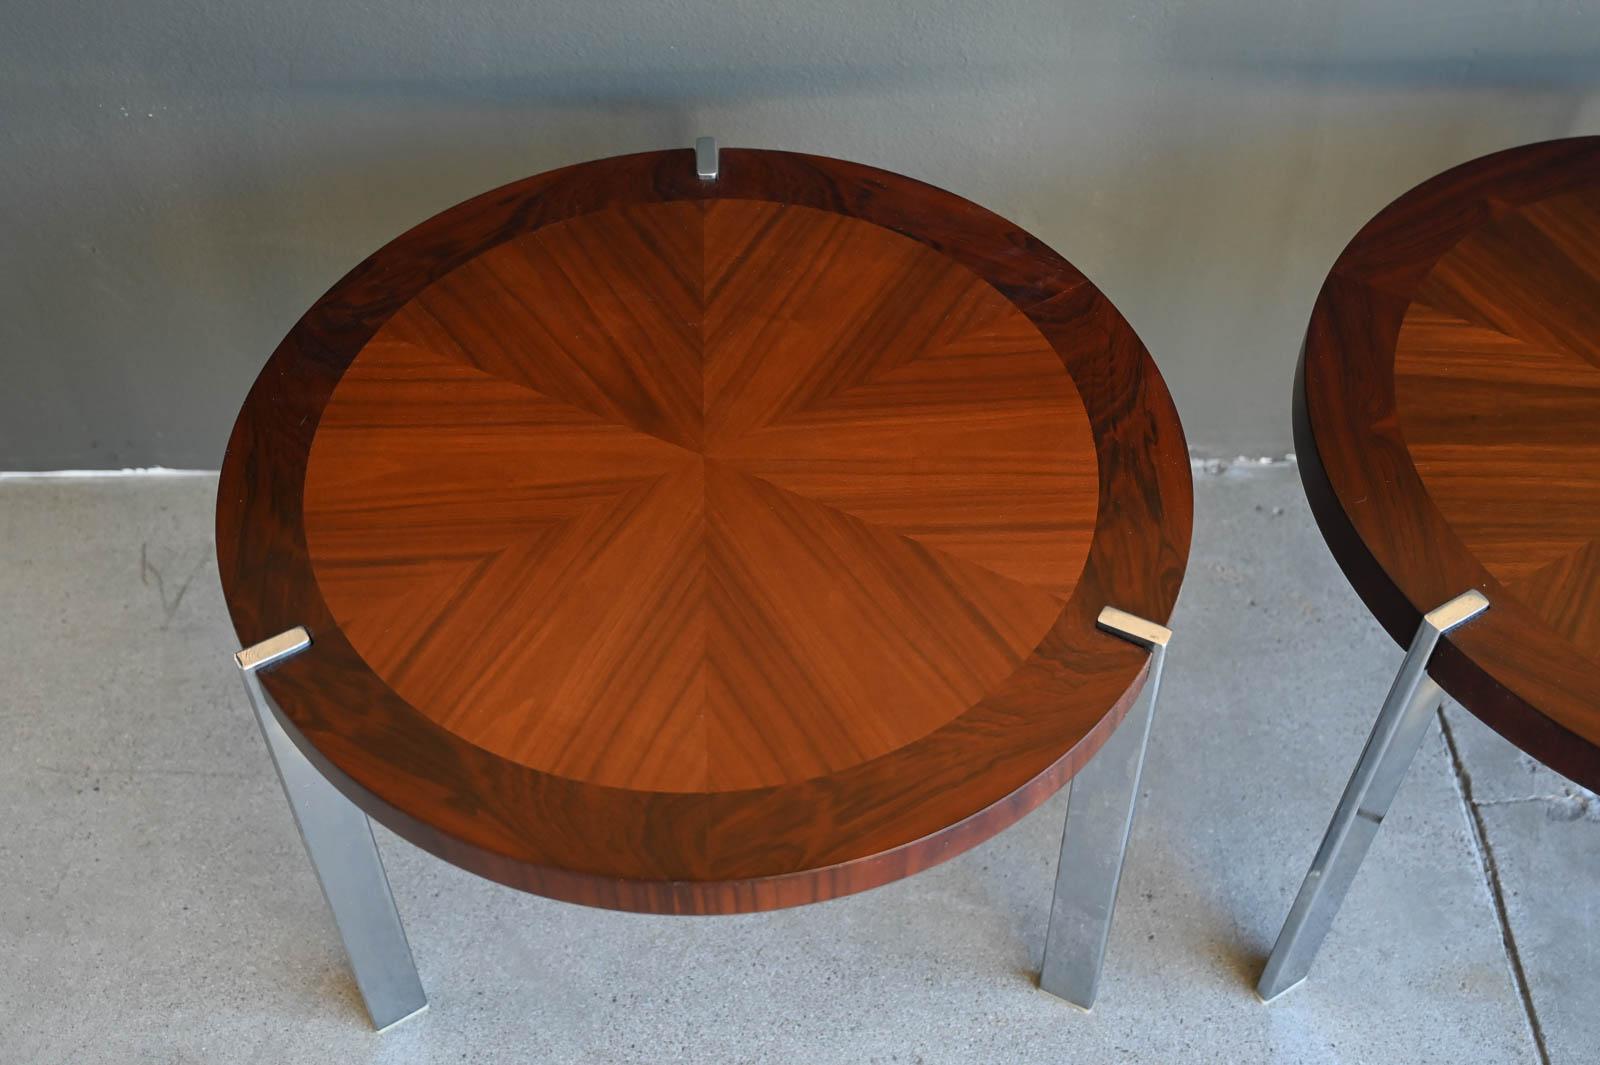 American Pair of Rosewood, Walnut and Chrome Side Tables from Lane, ca. 1965